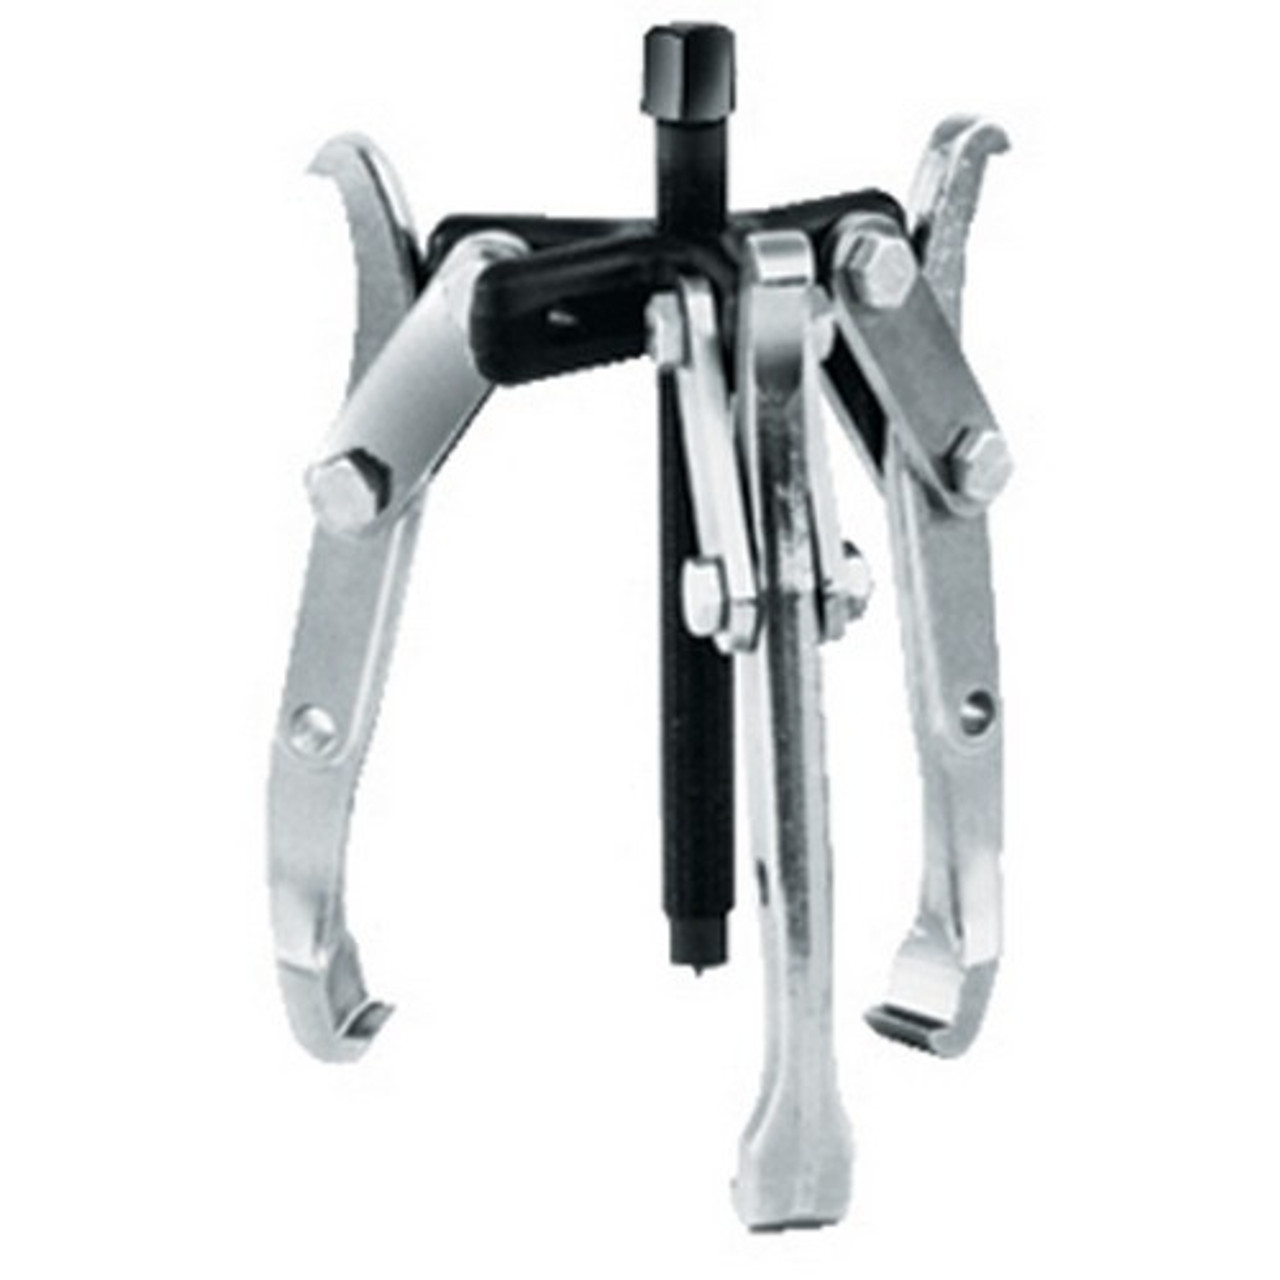 OTC (1028) Differential Bearing Puller